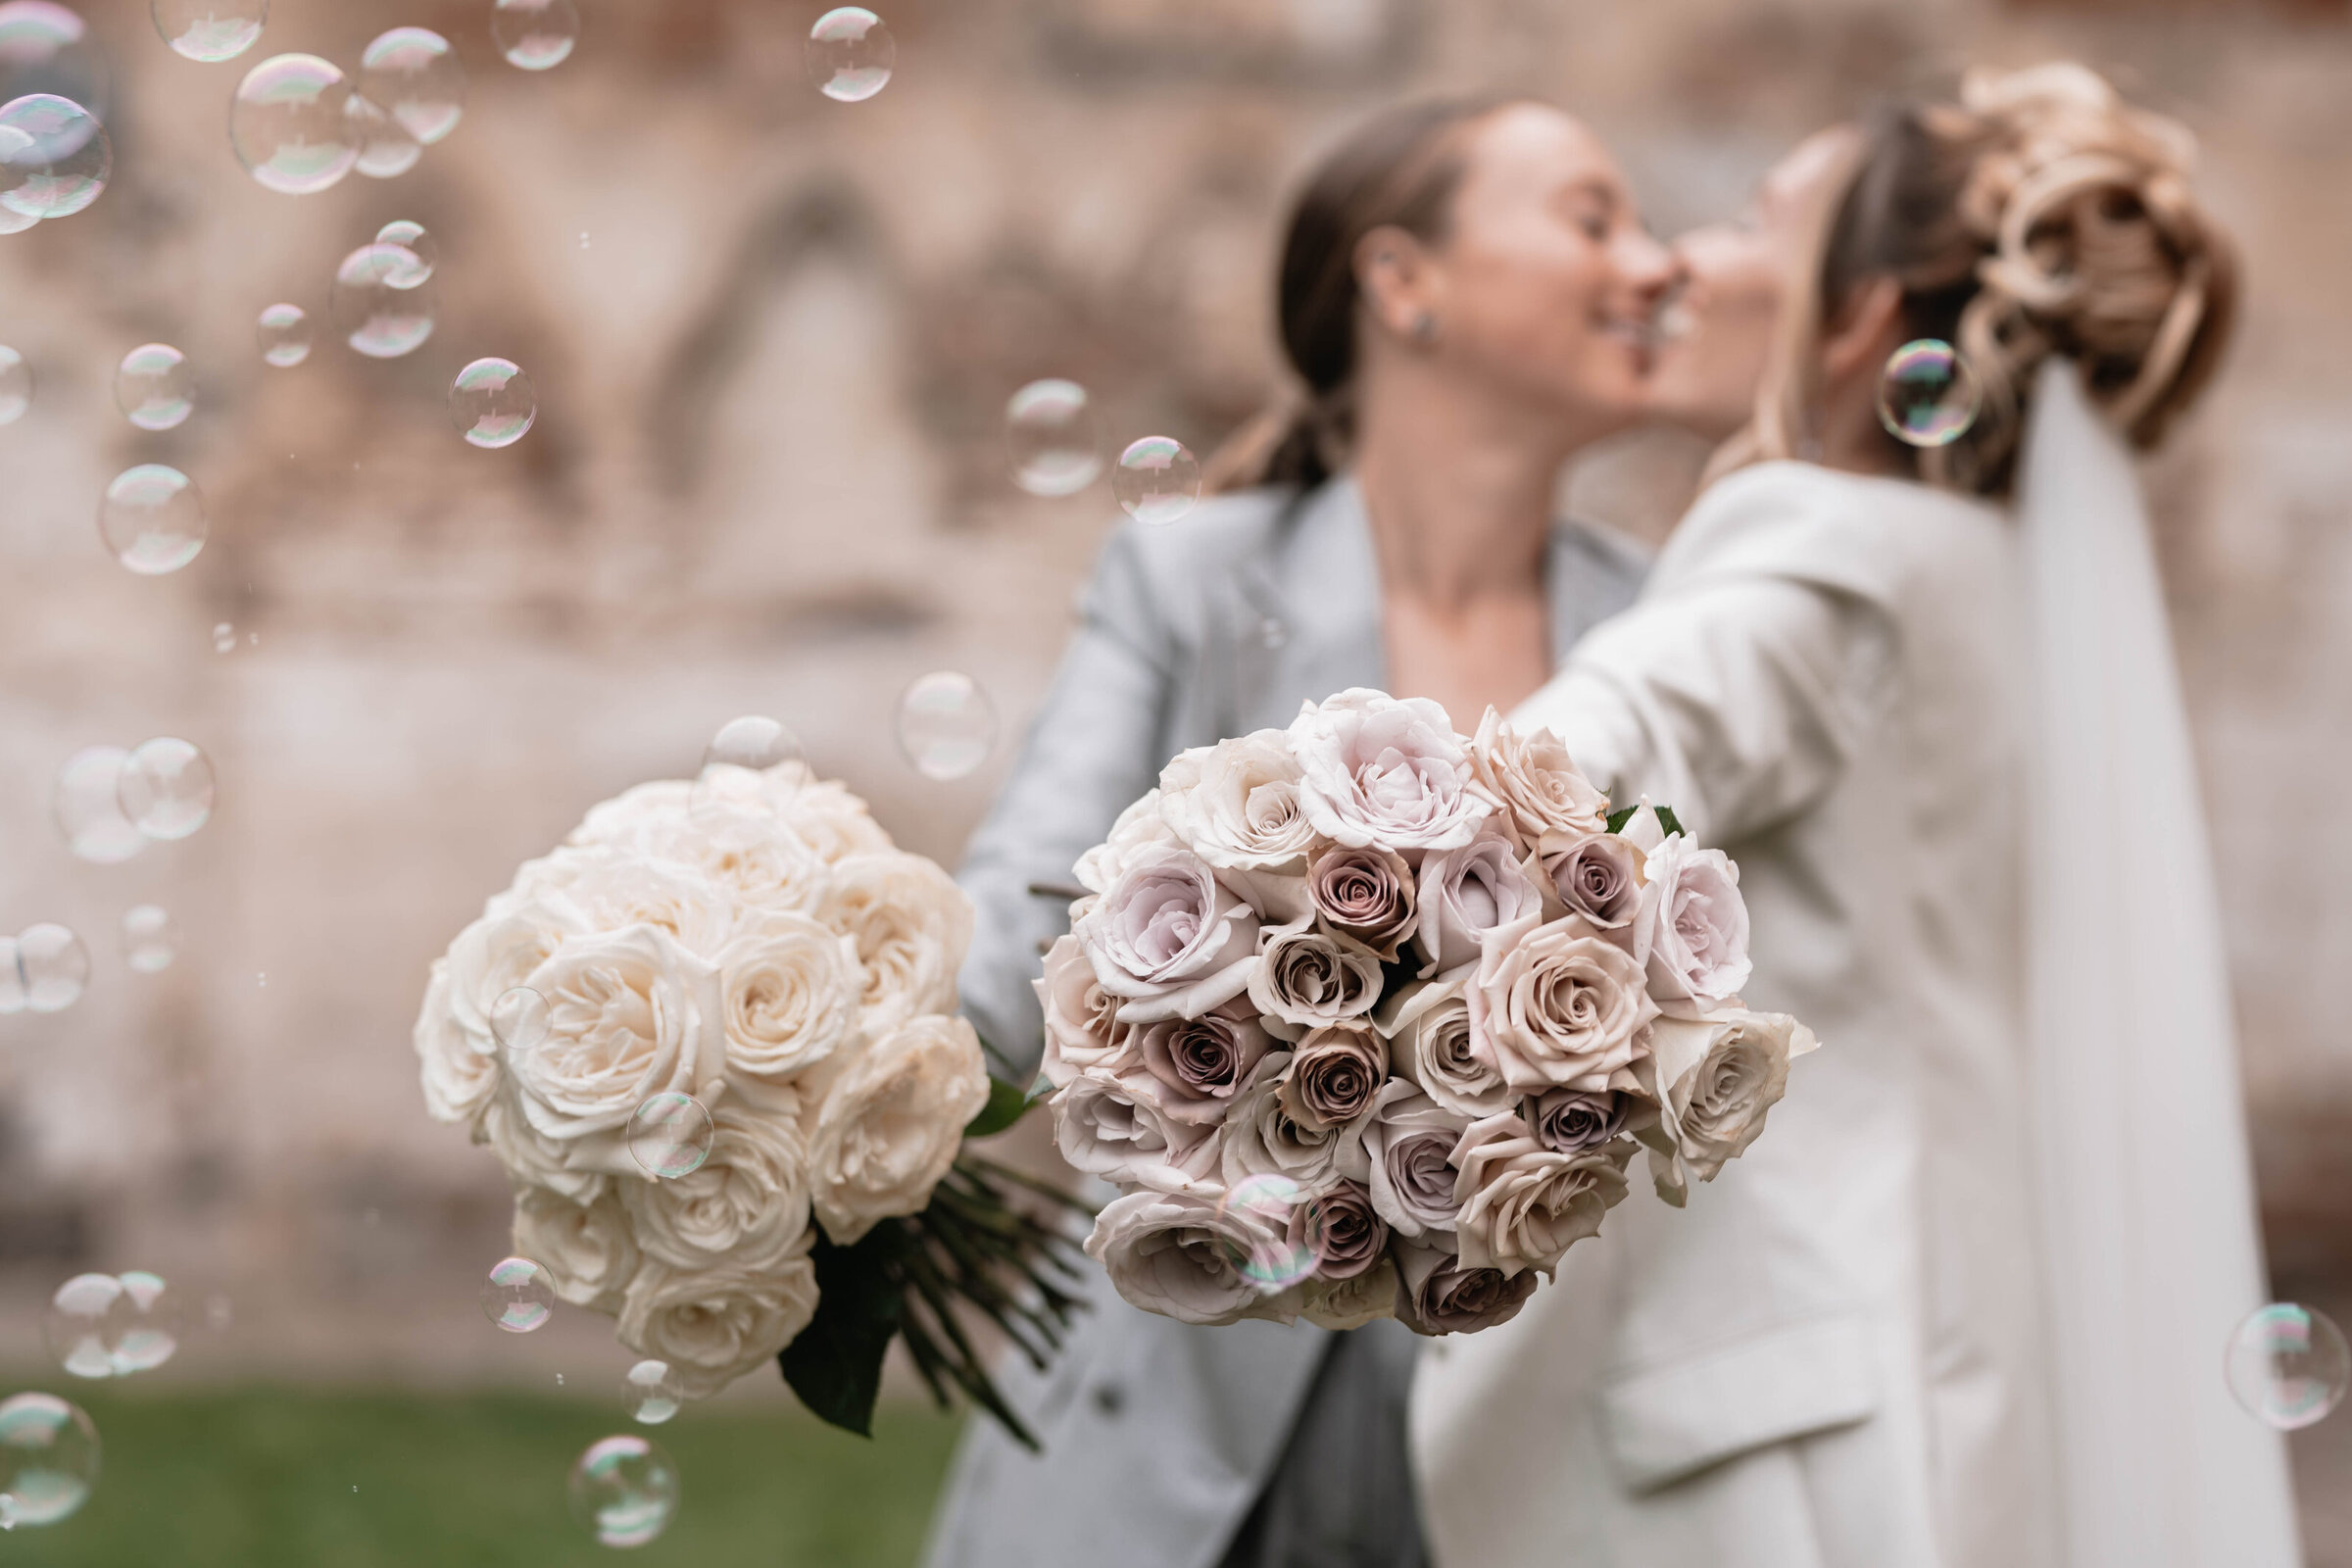 Two brides blurred in the background holding out bouquets of roses which are in focus in the forerground